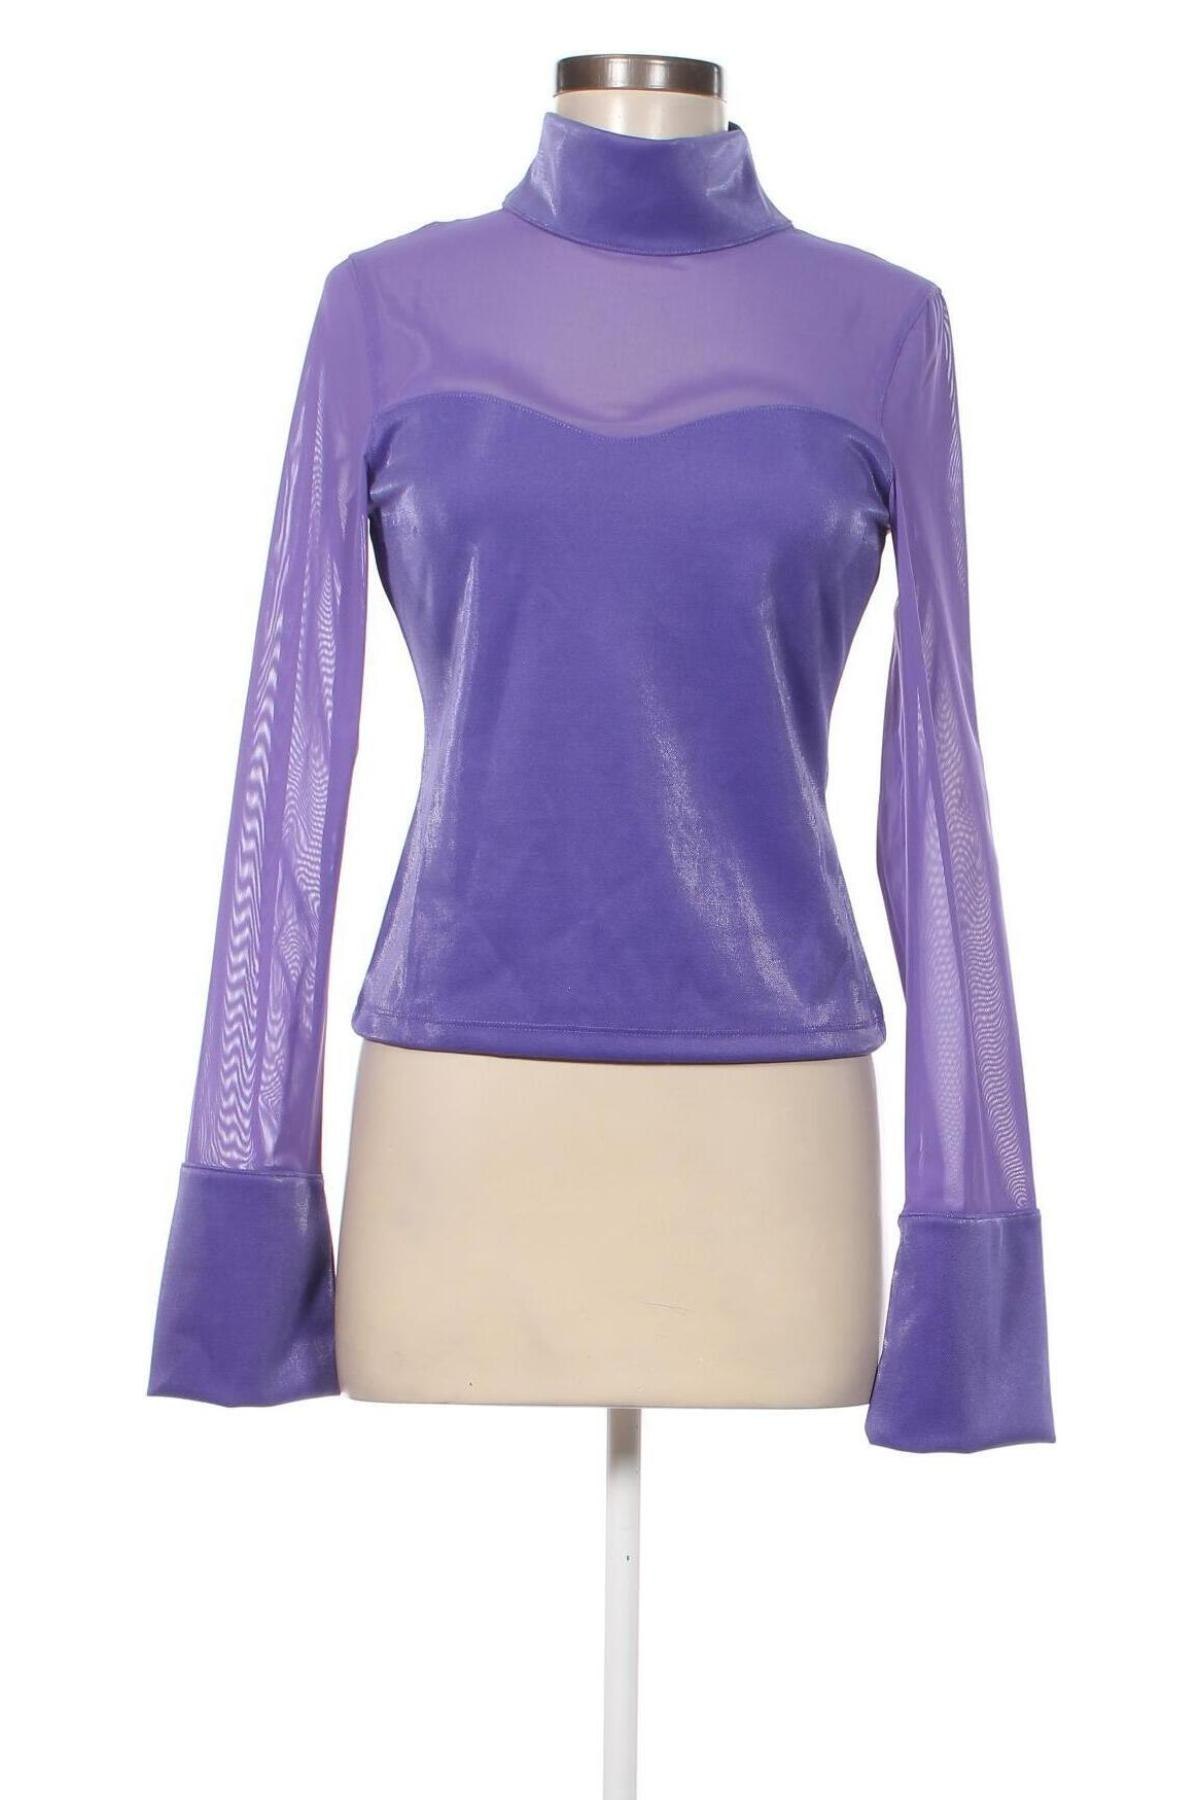 Damen Shirt Katy Perry exclusive for ABOUT YOU, Größe M, Farbe Lila, Preis 19,85 €